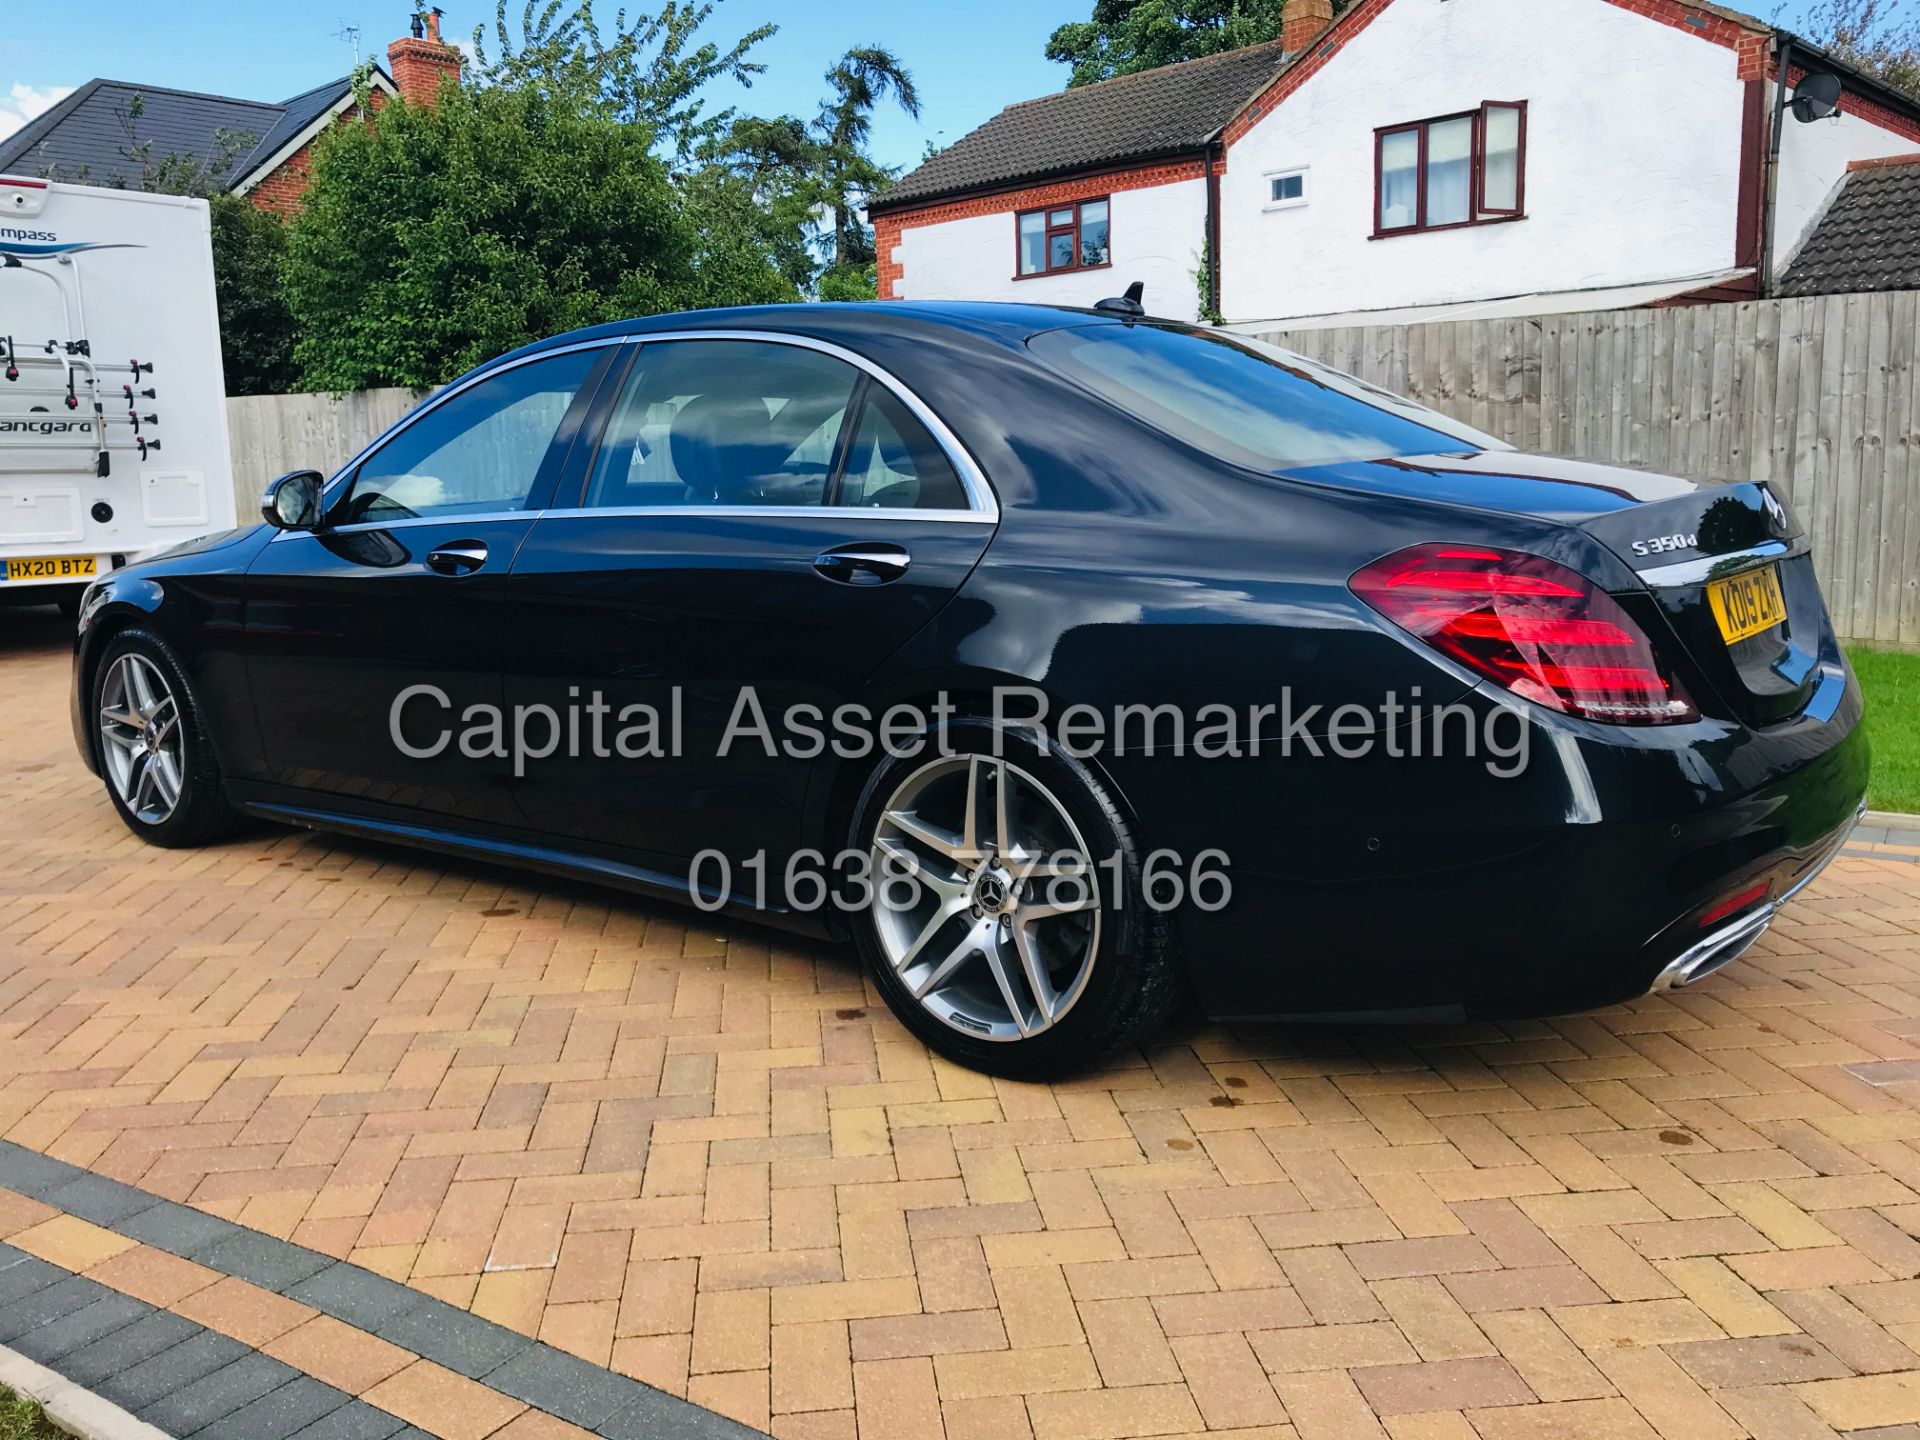 (On Sale) MERCEDES-BENZ S350D LWB *AMG LINE - EXECUTIVE SALOON* (2019) 9-G TRONIC *TOP OF THE RANGE* - Image 9 of 23